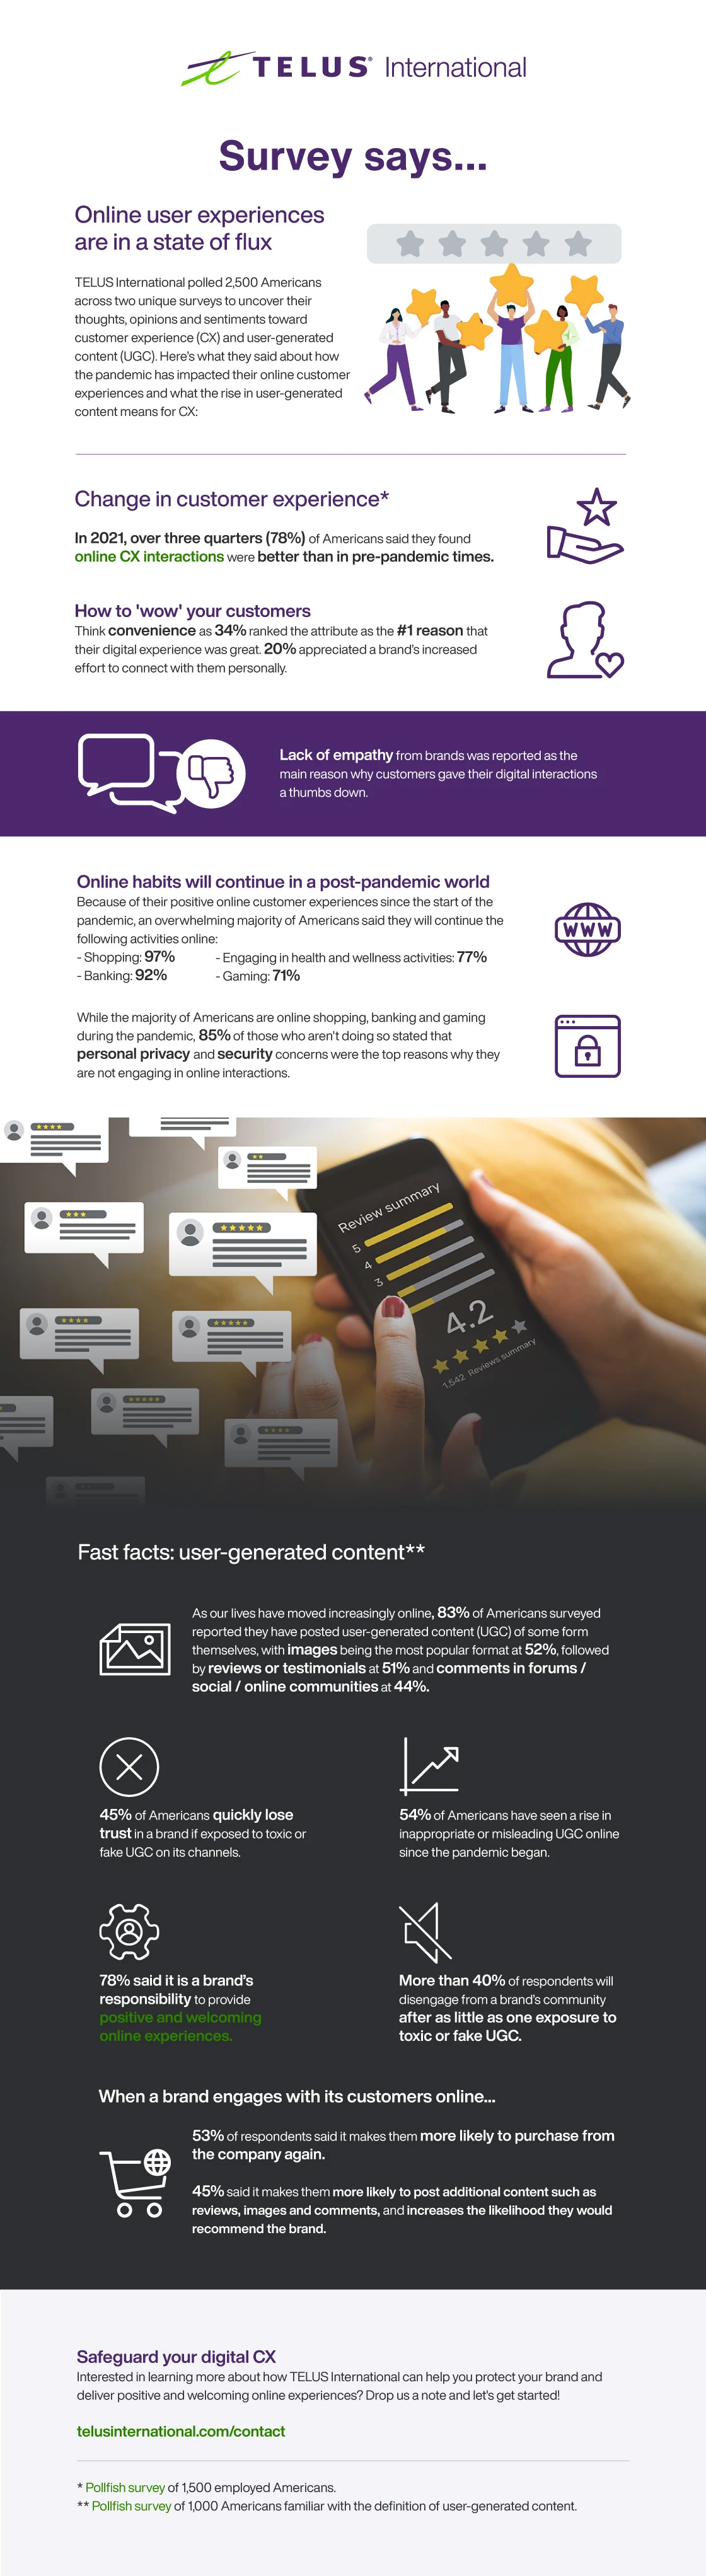 TELUS International infographic about content moderation and customer experience (CX)